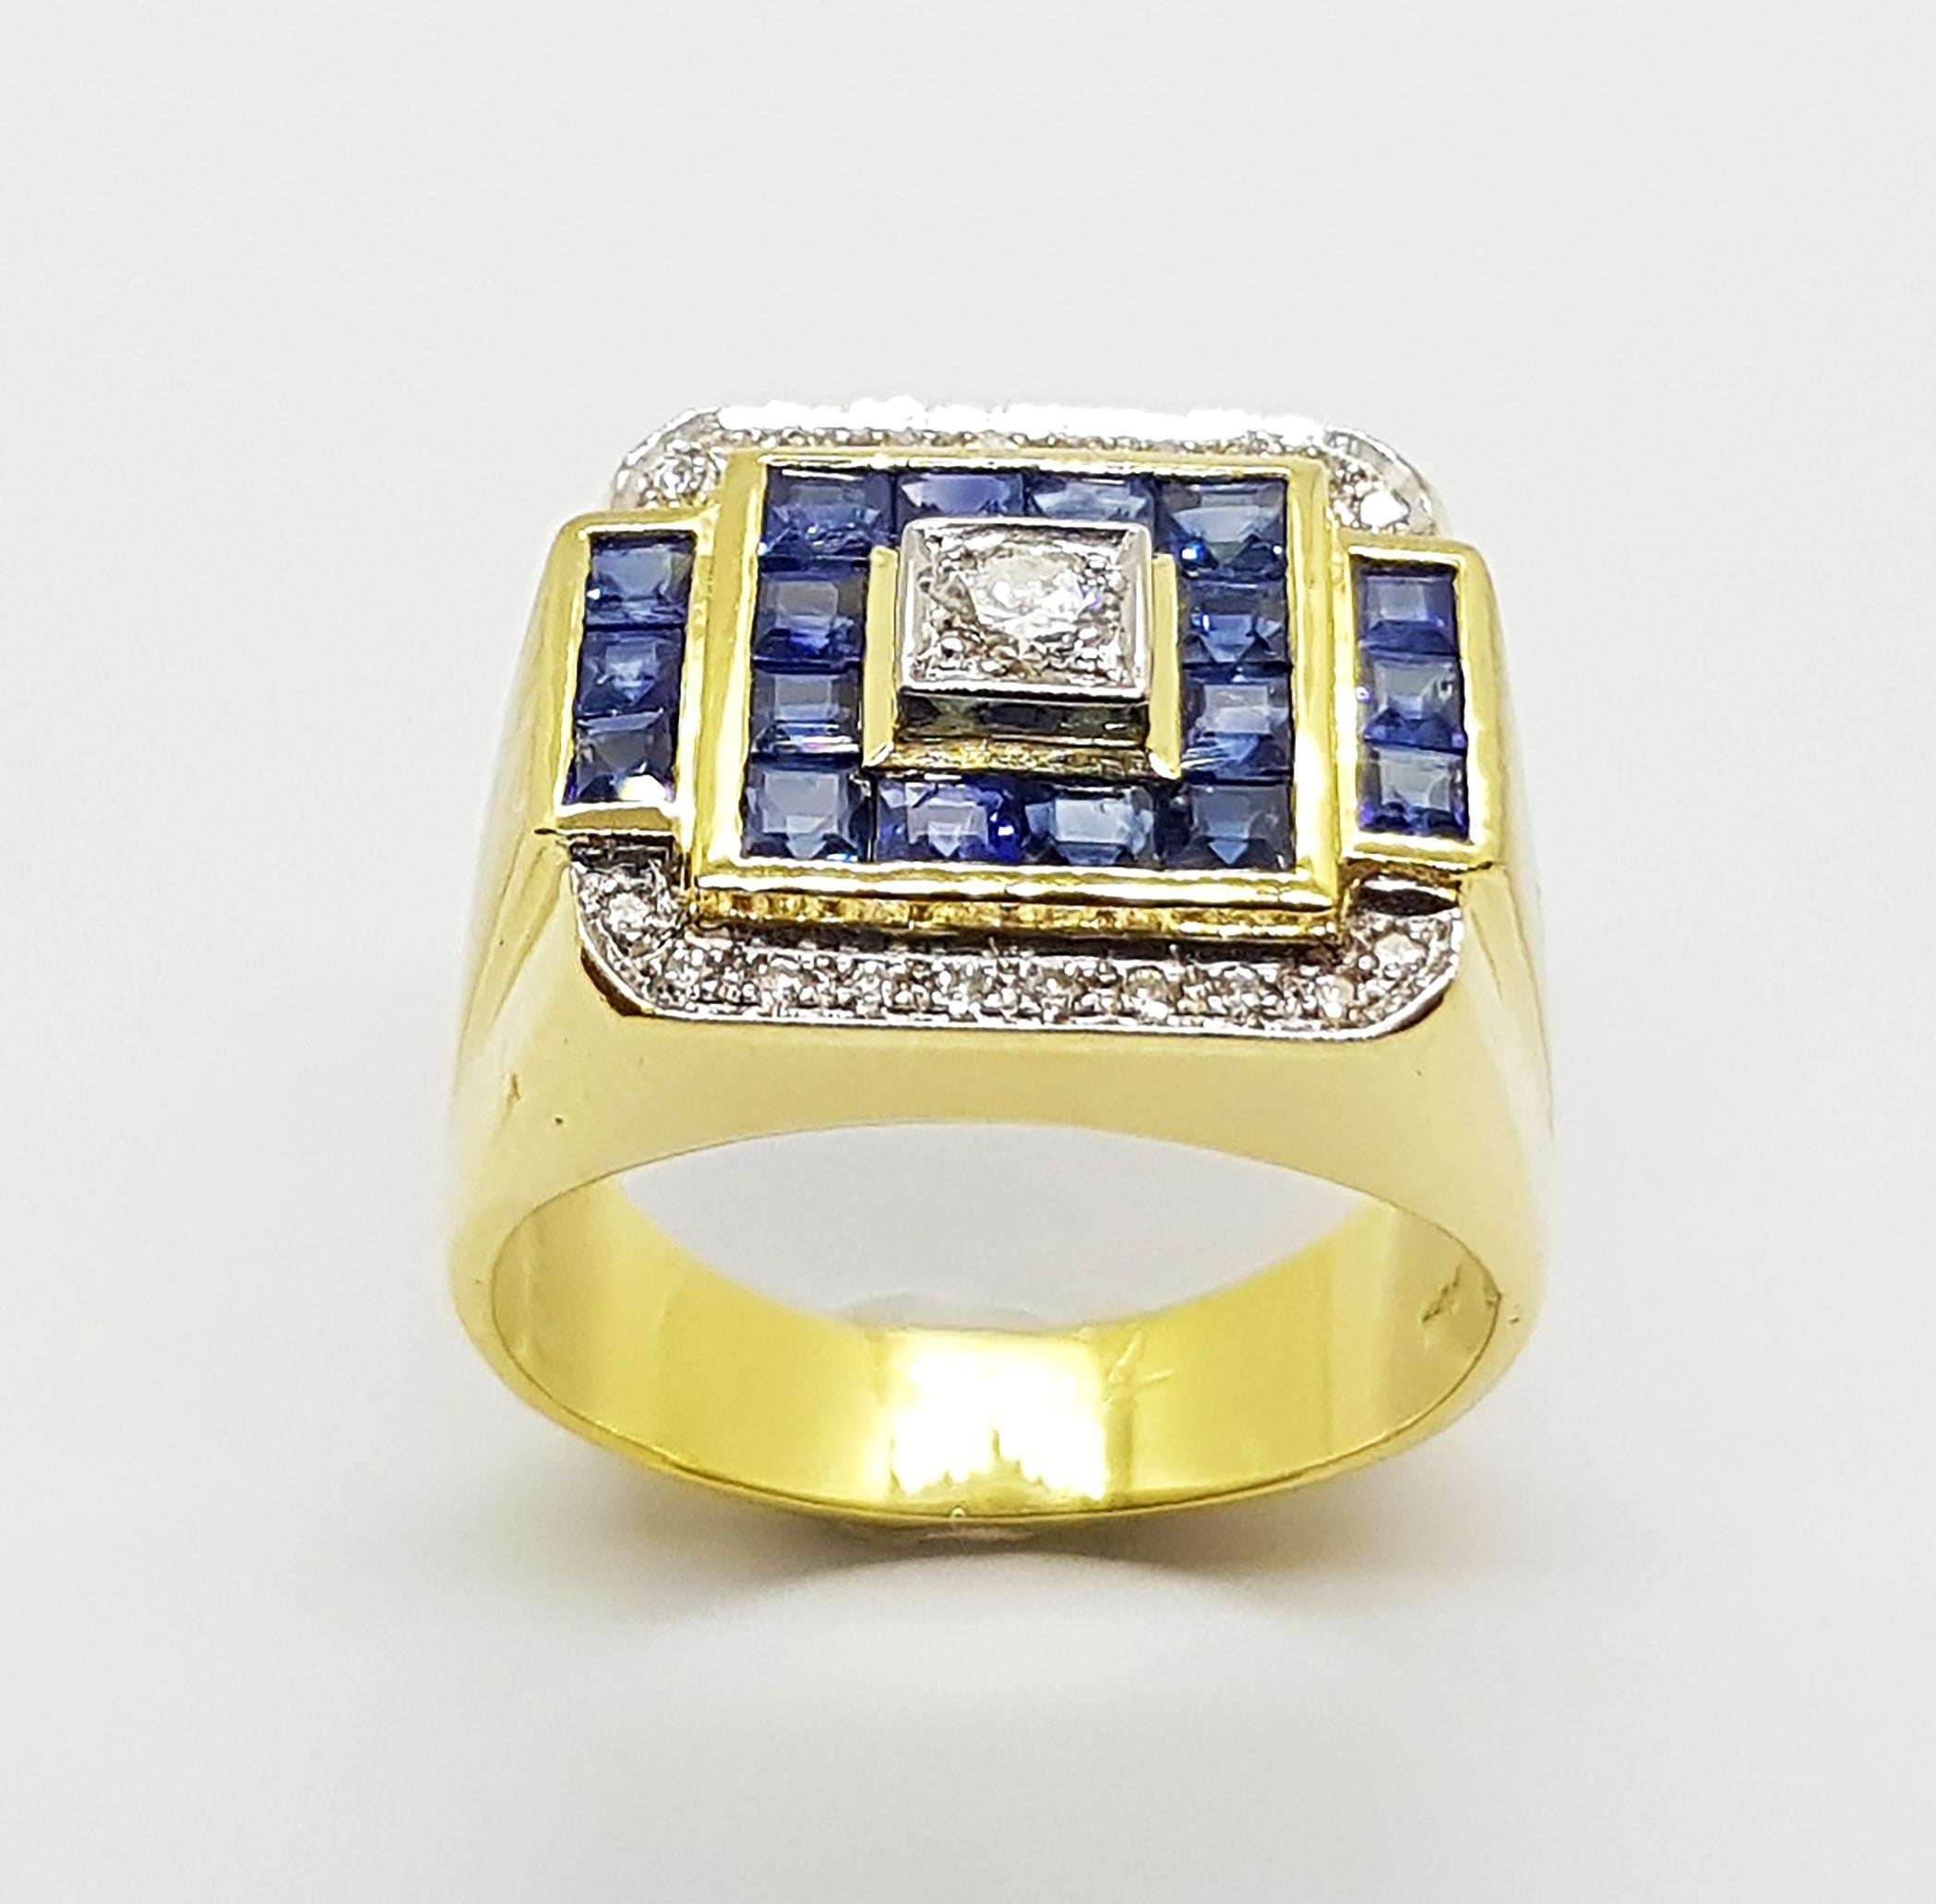 Blue Sapphire 1.74 carats with Diamond 0.23 carat Ring set in 18 Karat Gold Settings

Width:  1.8 cm 
Length: 1.4 cm
Ring Size: 57
Total Weight: 10.68 grams

